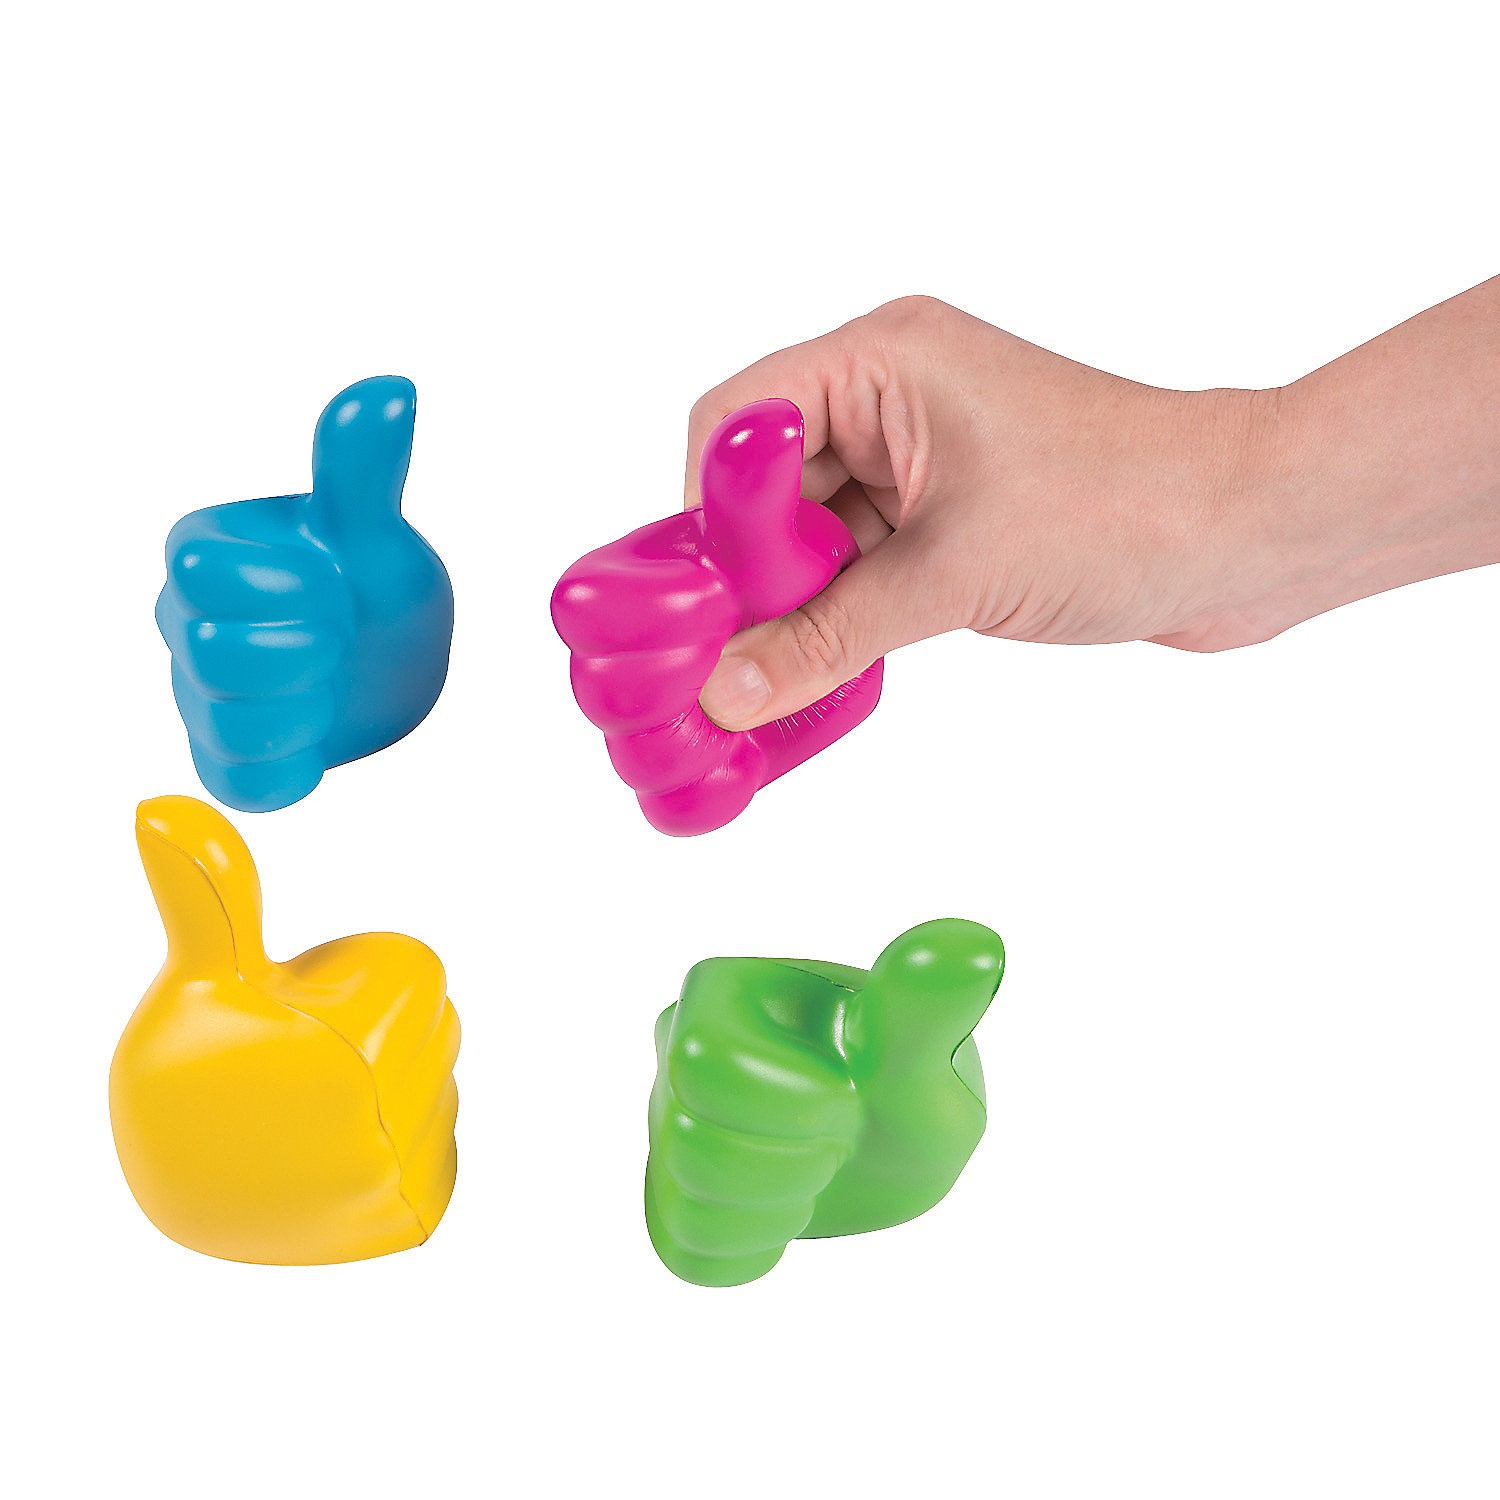 thumbs-up-stress-toys-12-pc-_13663594